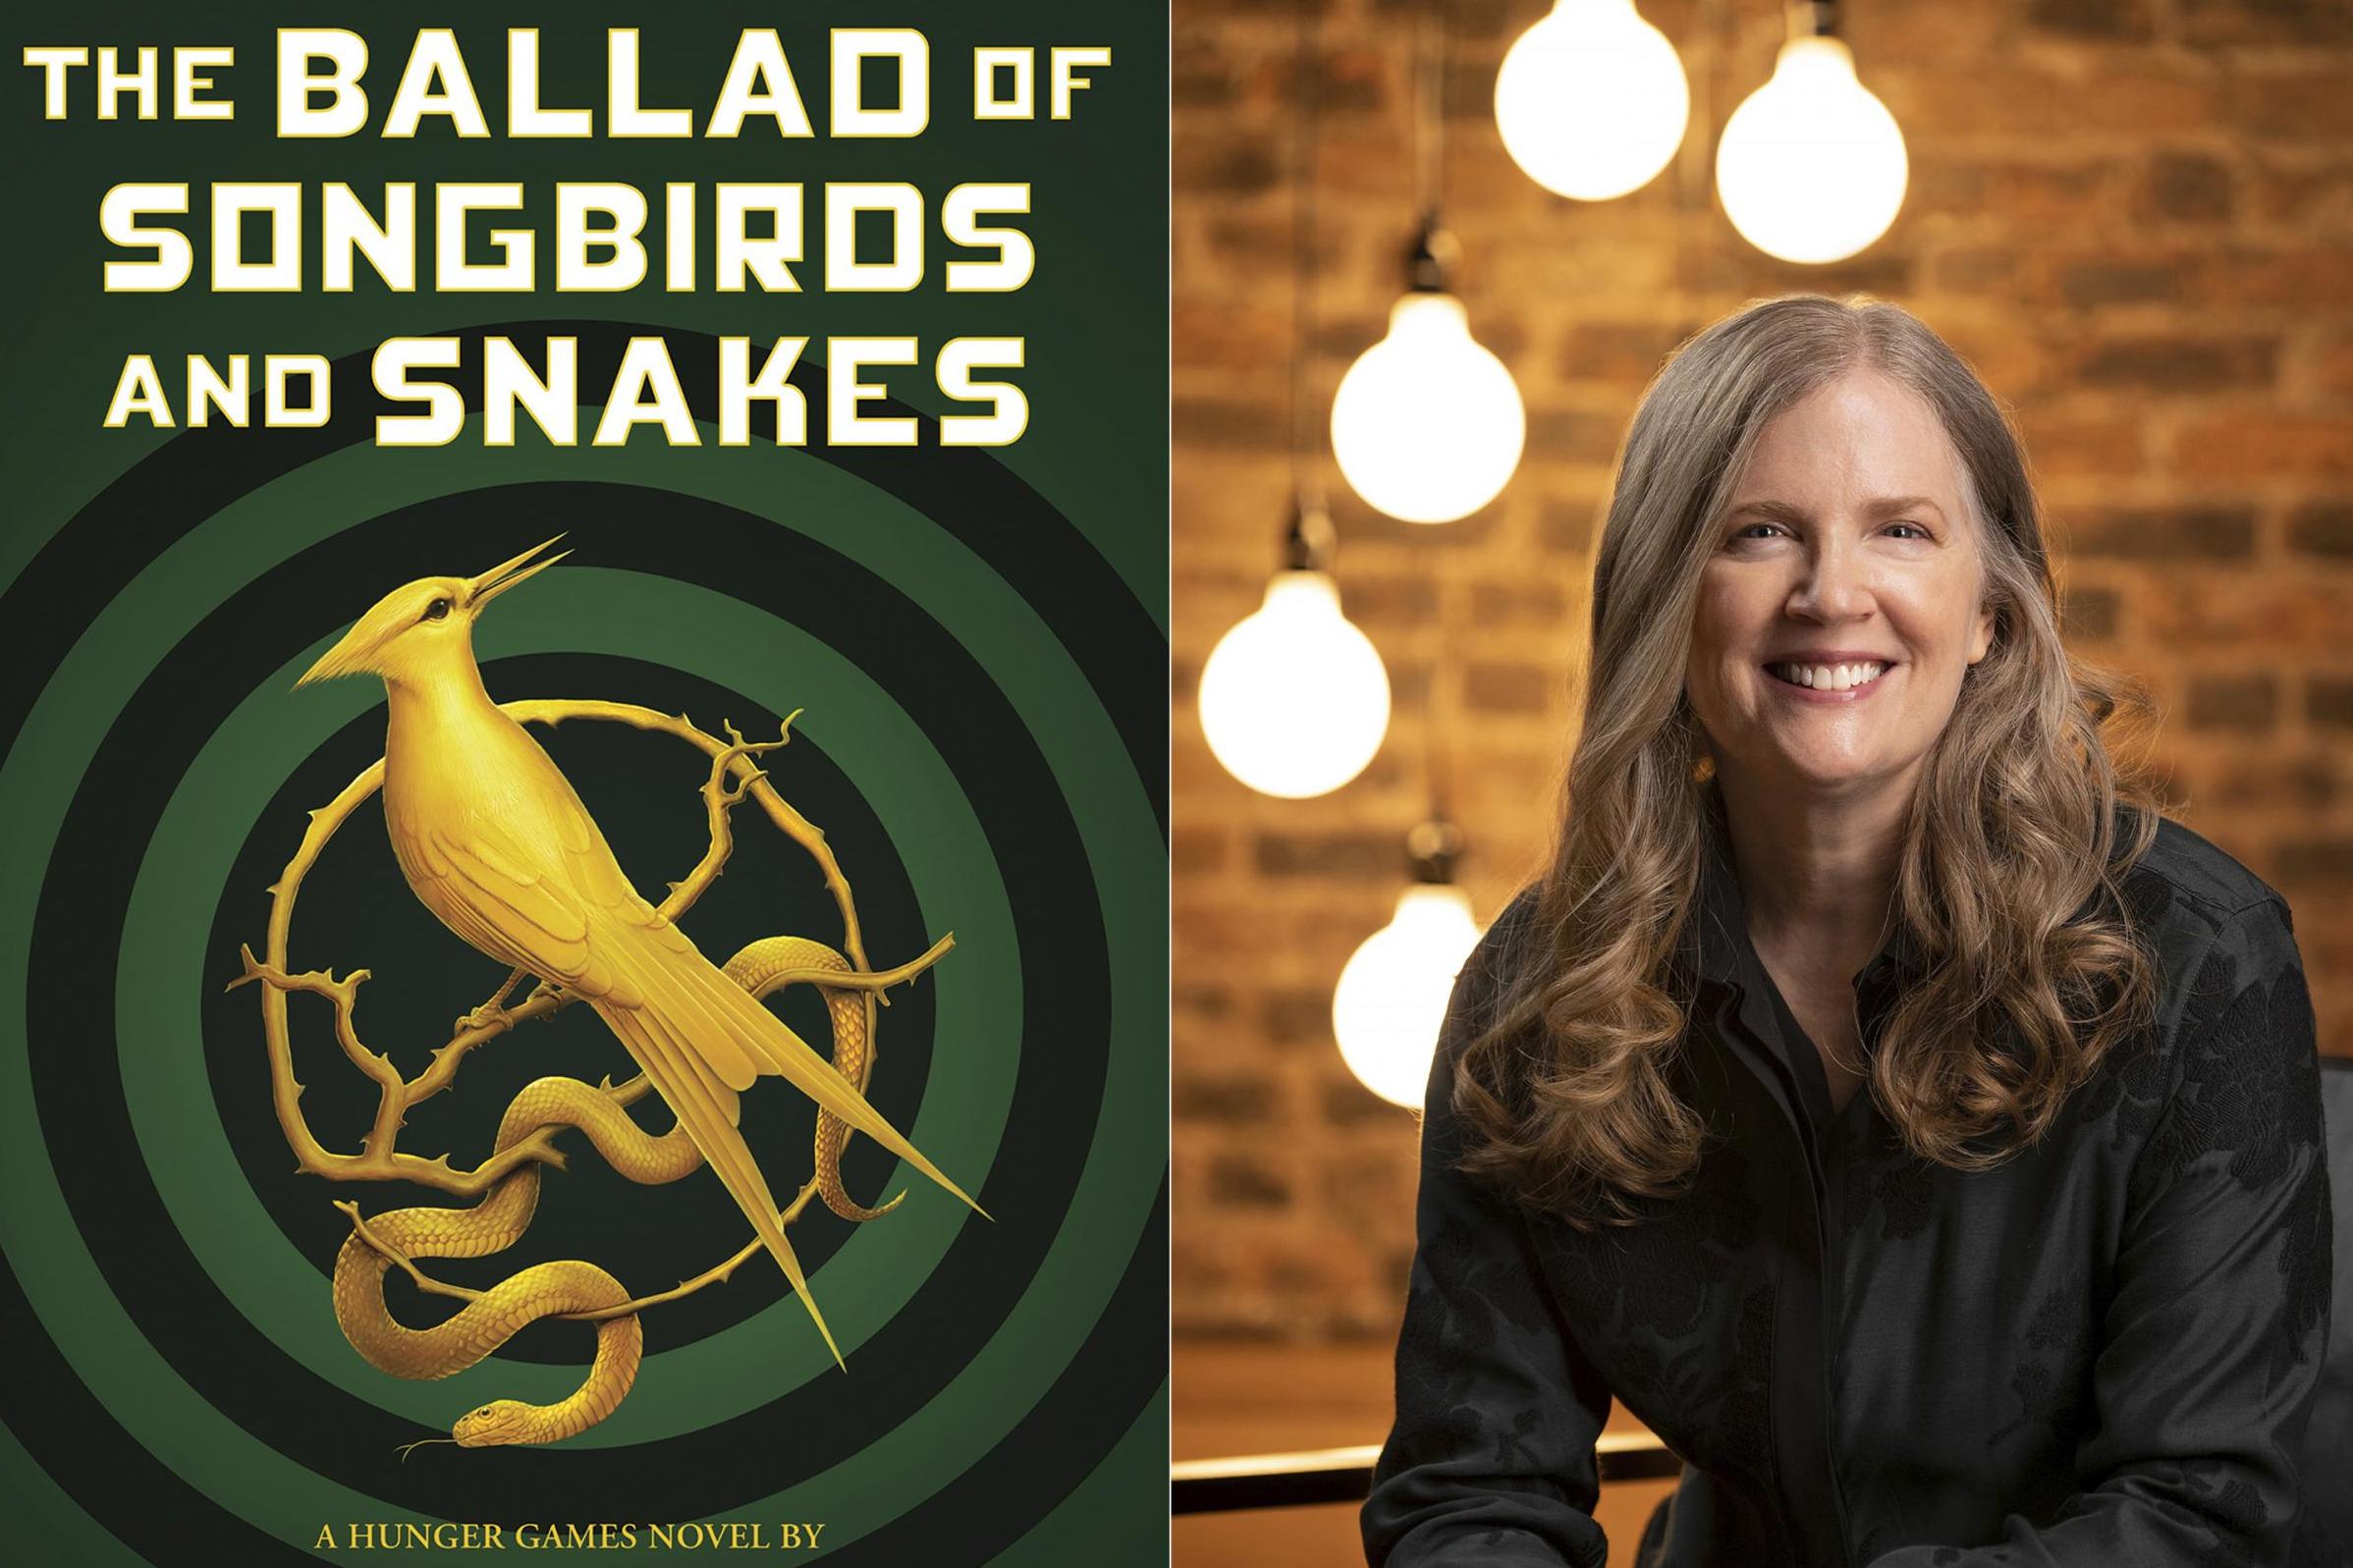 Hunger Games prequel: What critics are saying about Suzanne Collins's 'The Ballad of Songbirds and Snakes'